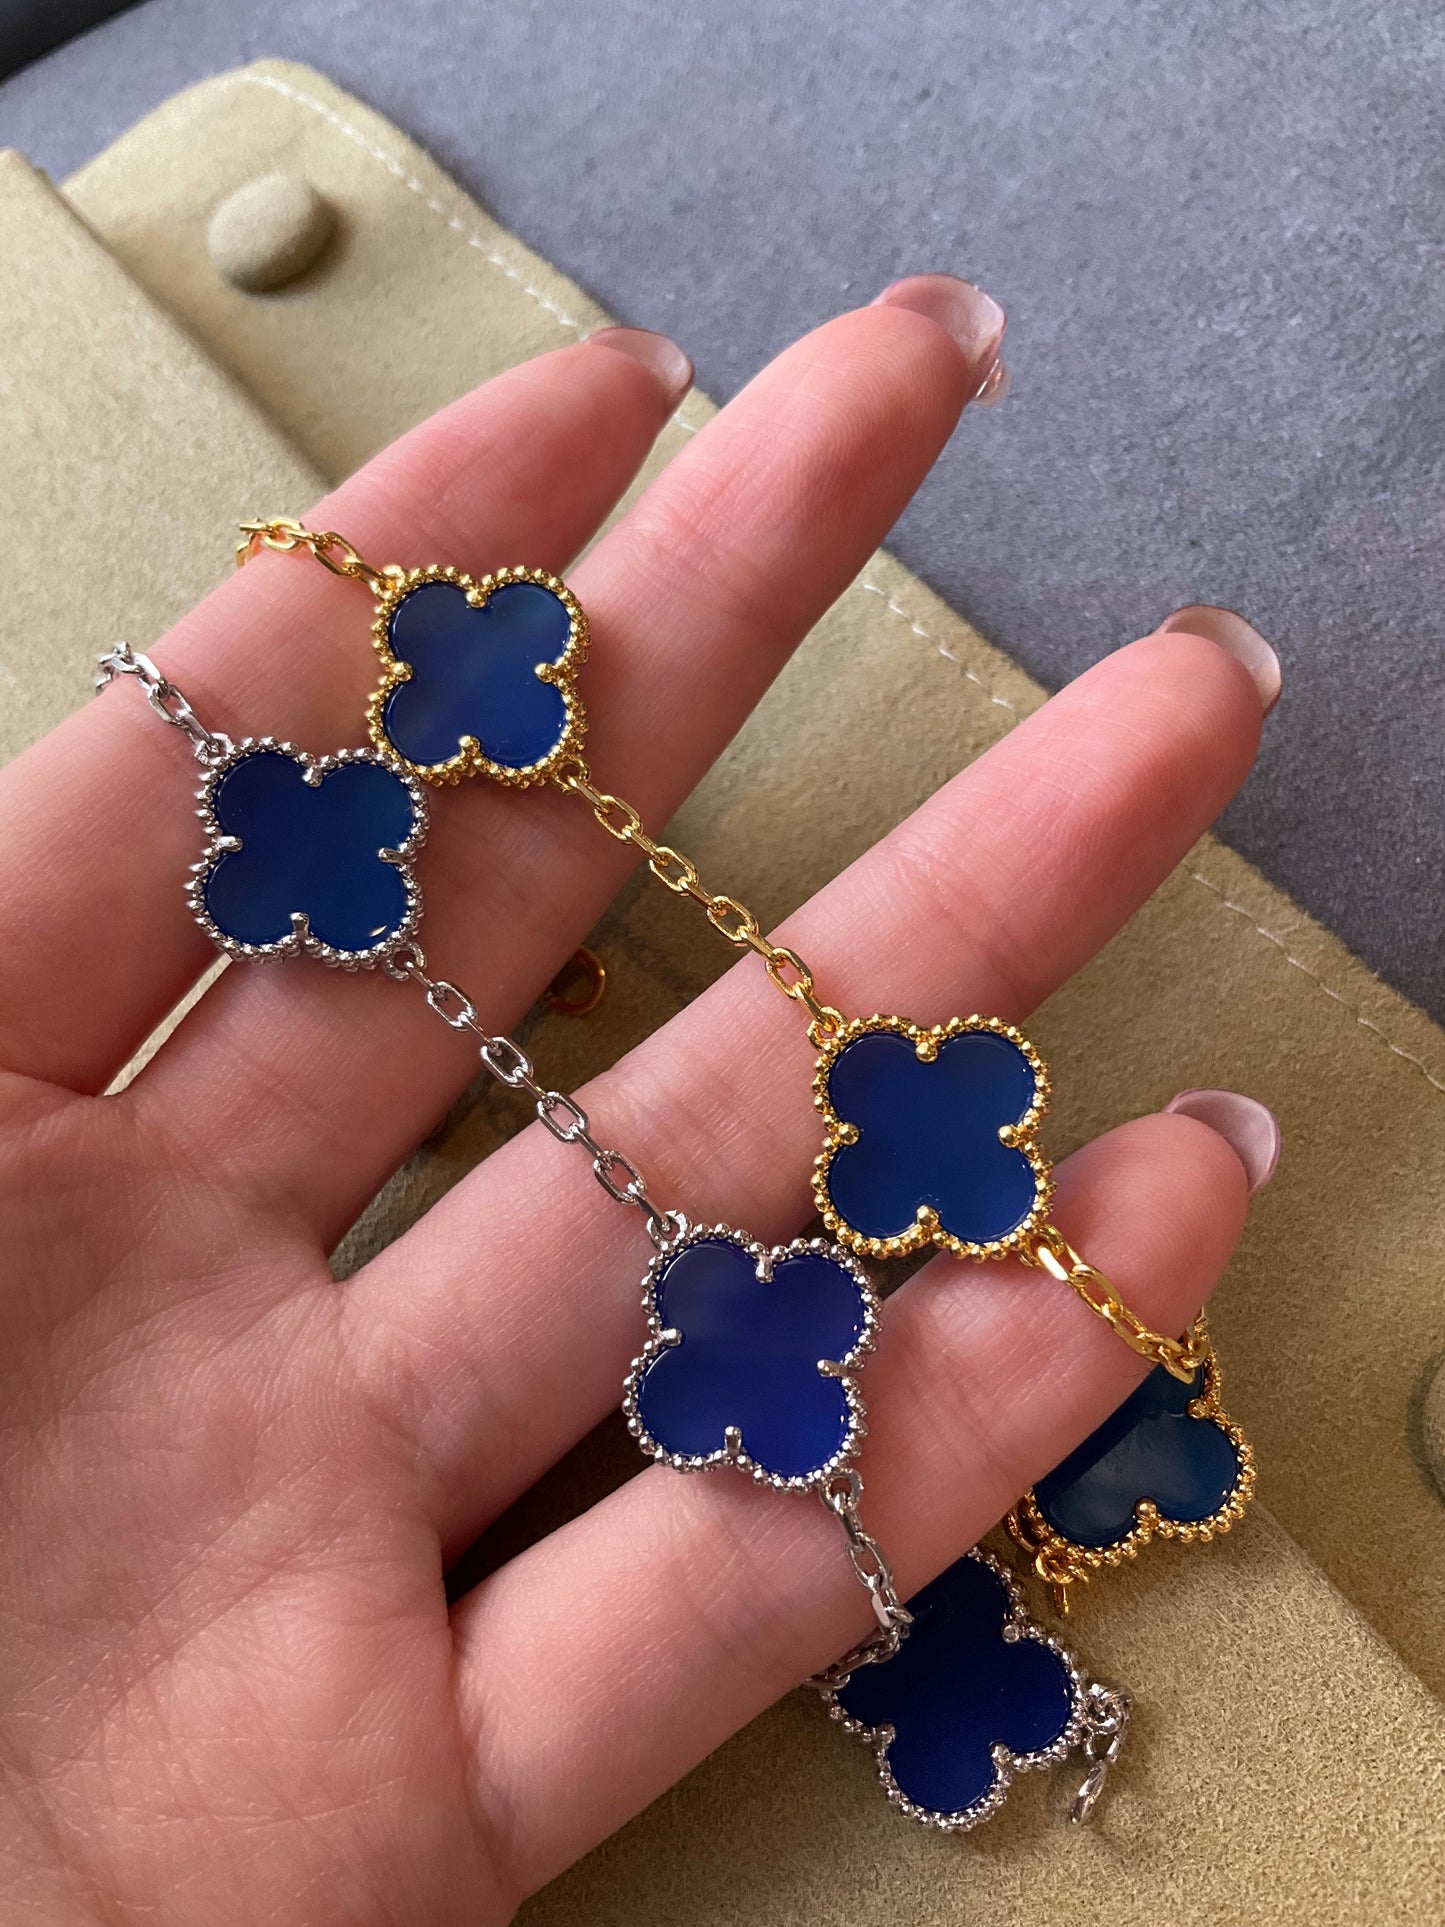 5 motifs 15mm clover blue agate clover bracelet 925 silver with 18k gold plated 7.5 inches - ParadiseKissCo